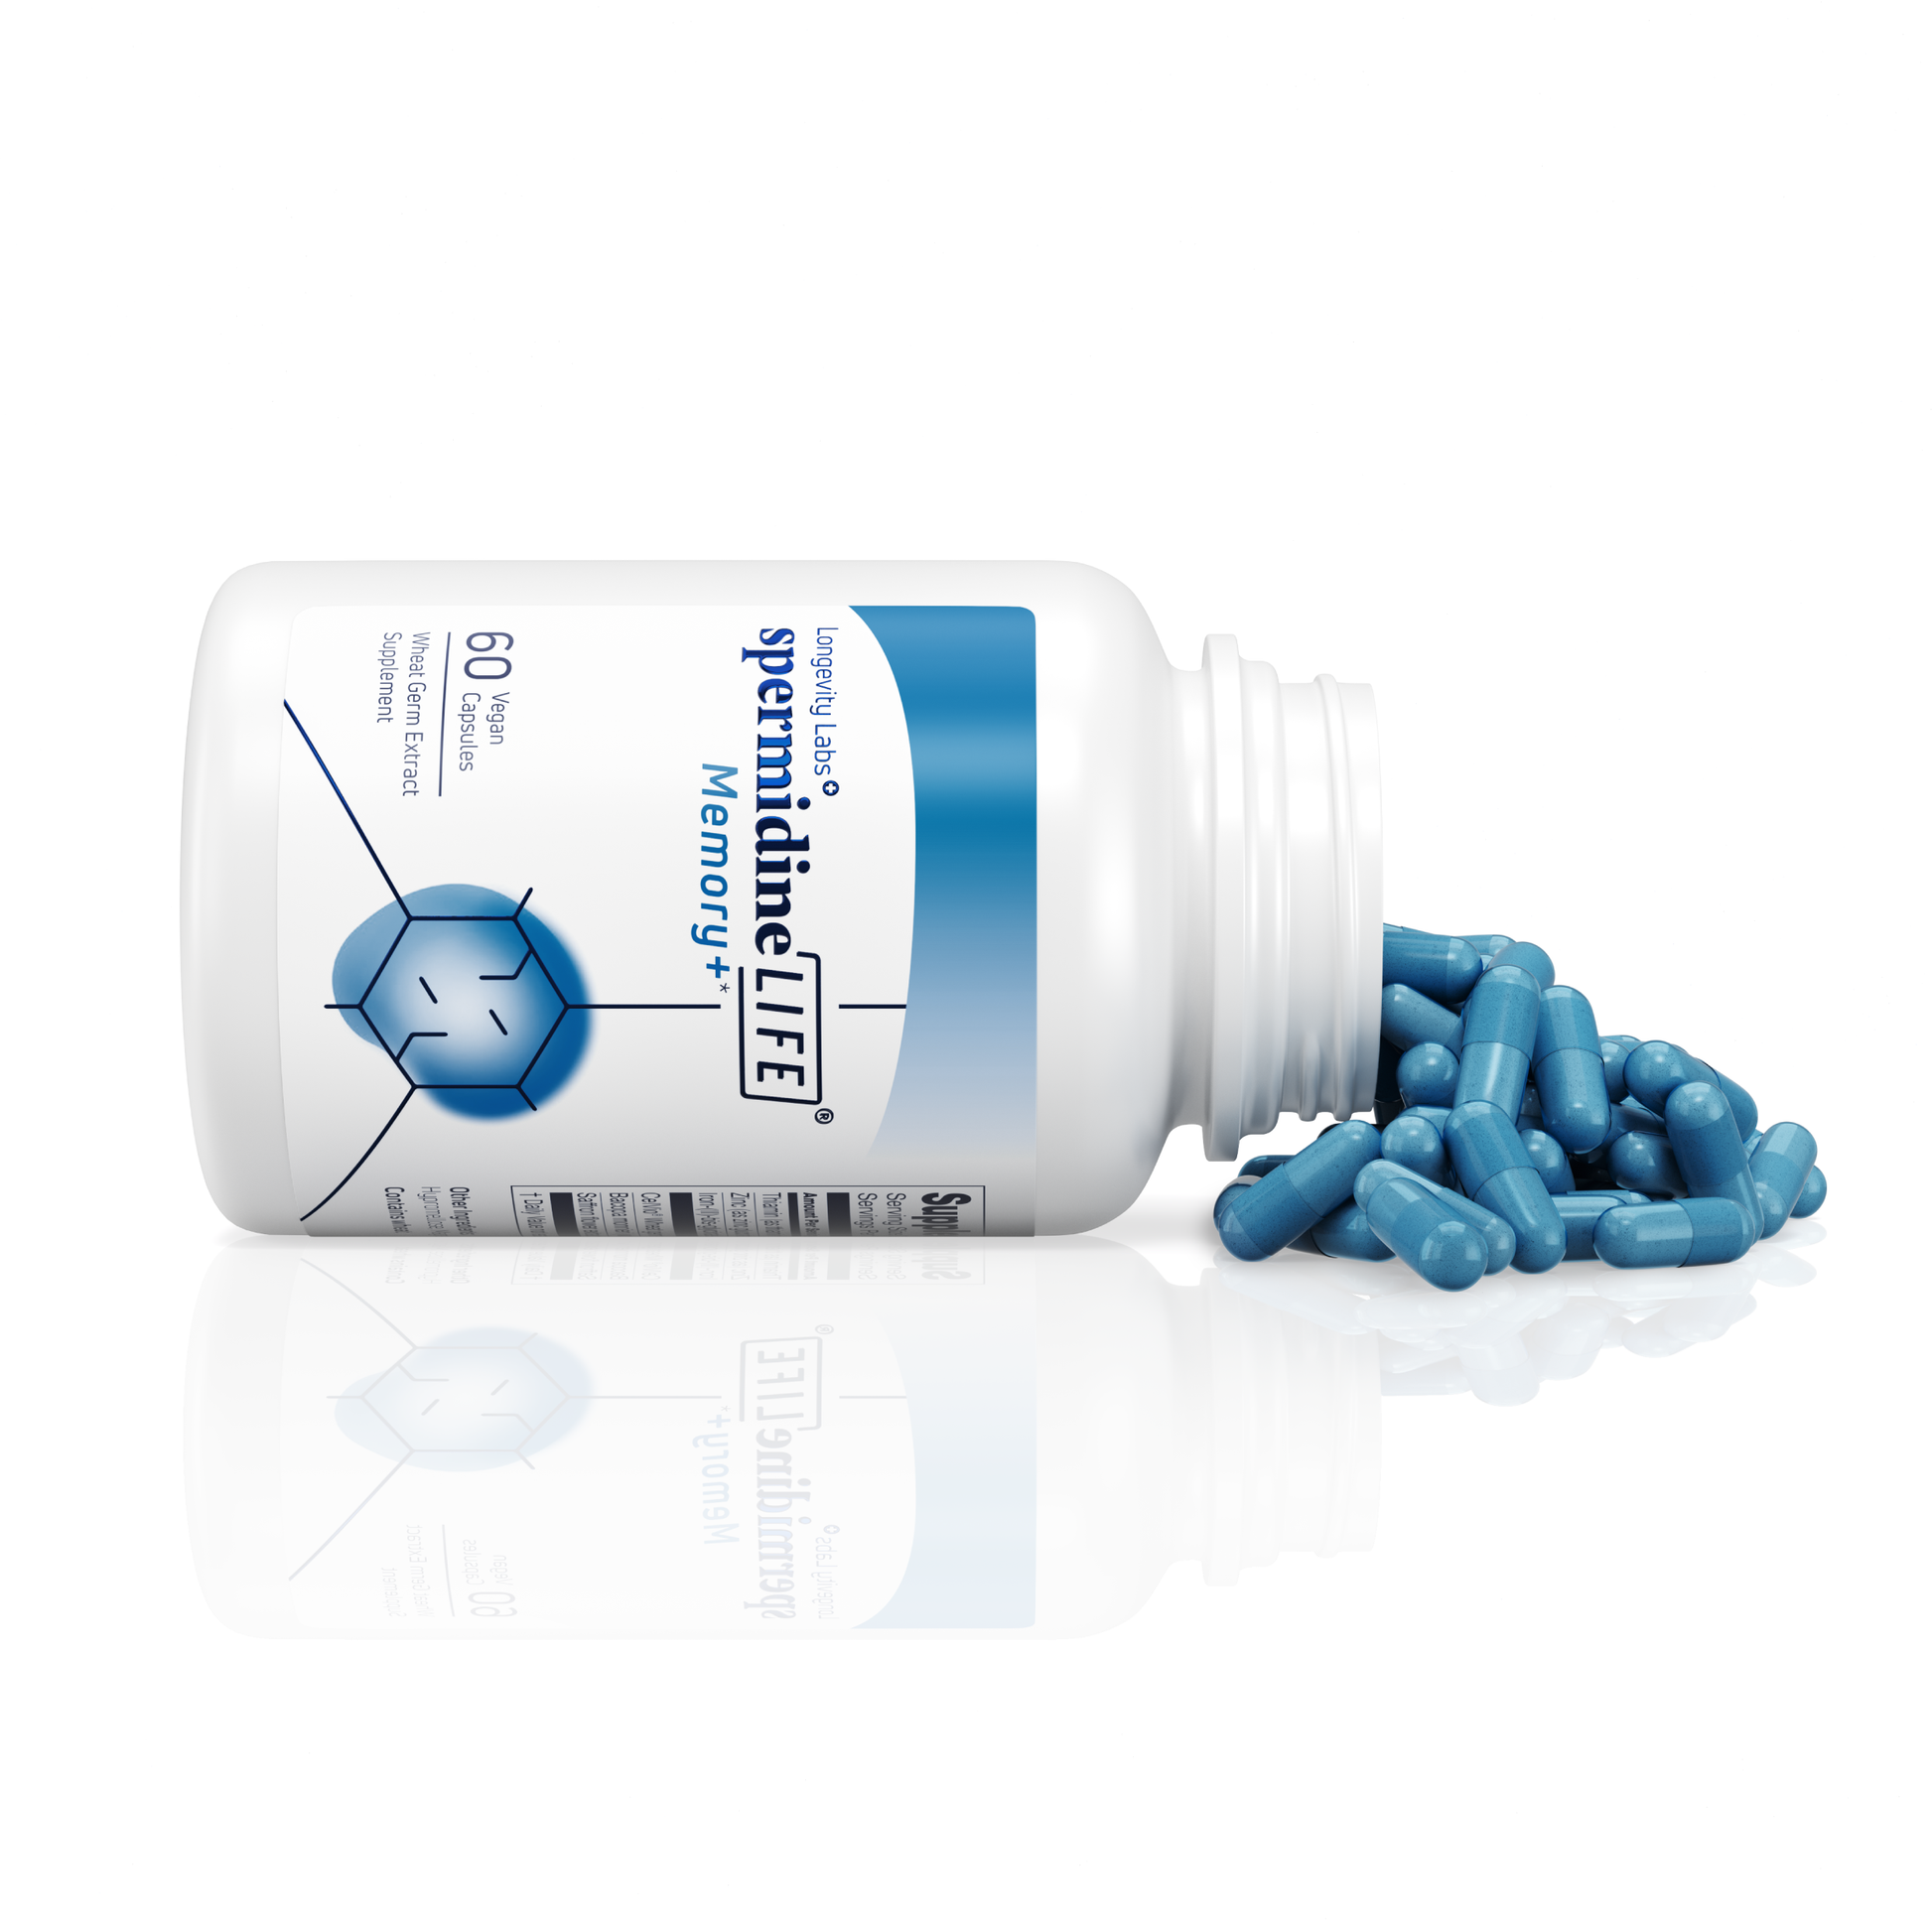 A bottle of spermidineLIFE® Memory+ 1300mg Dietary Supplement capsules by spermidineLIFE® on a white background.